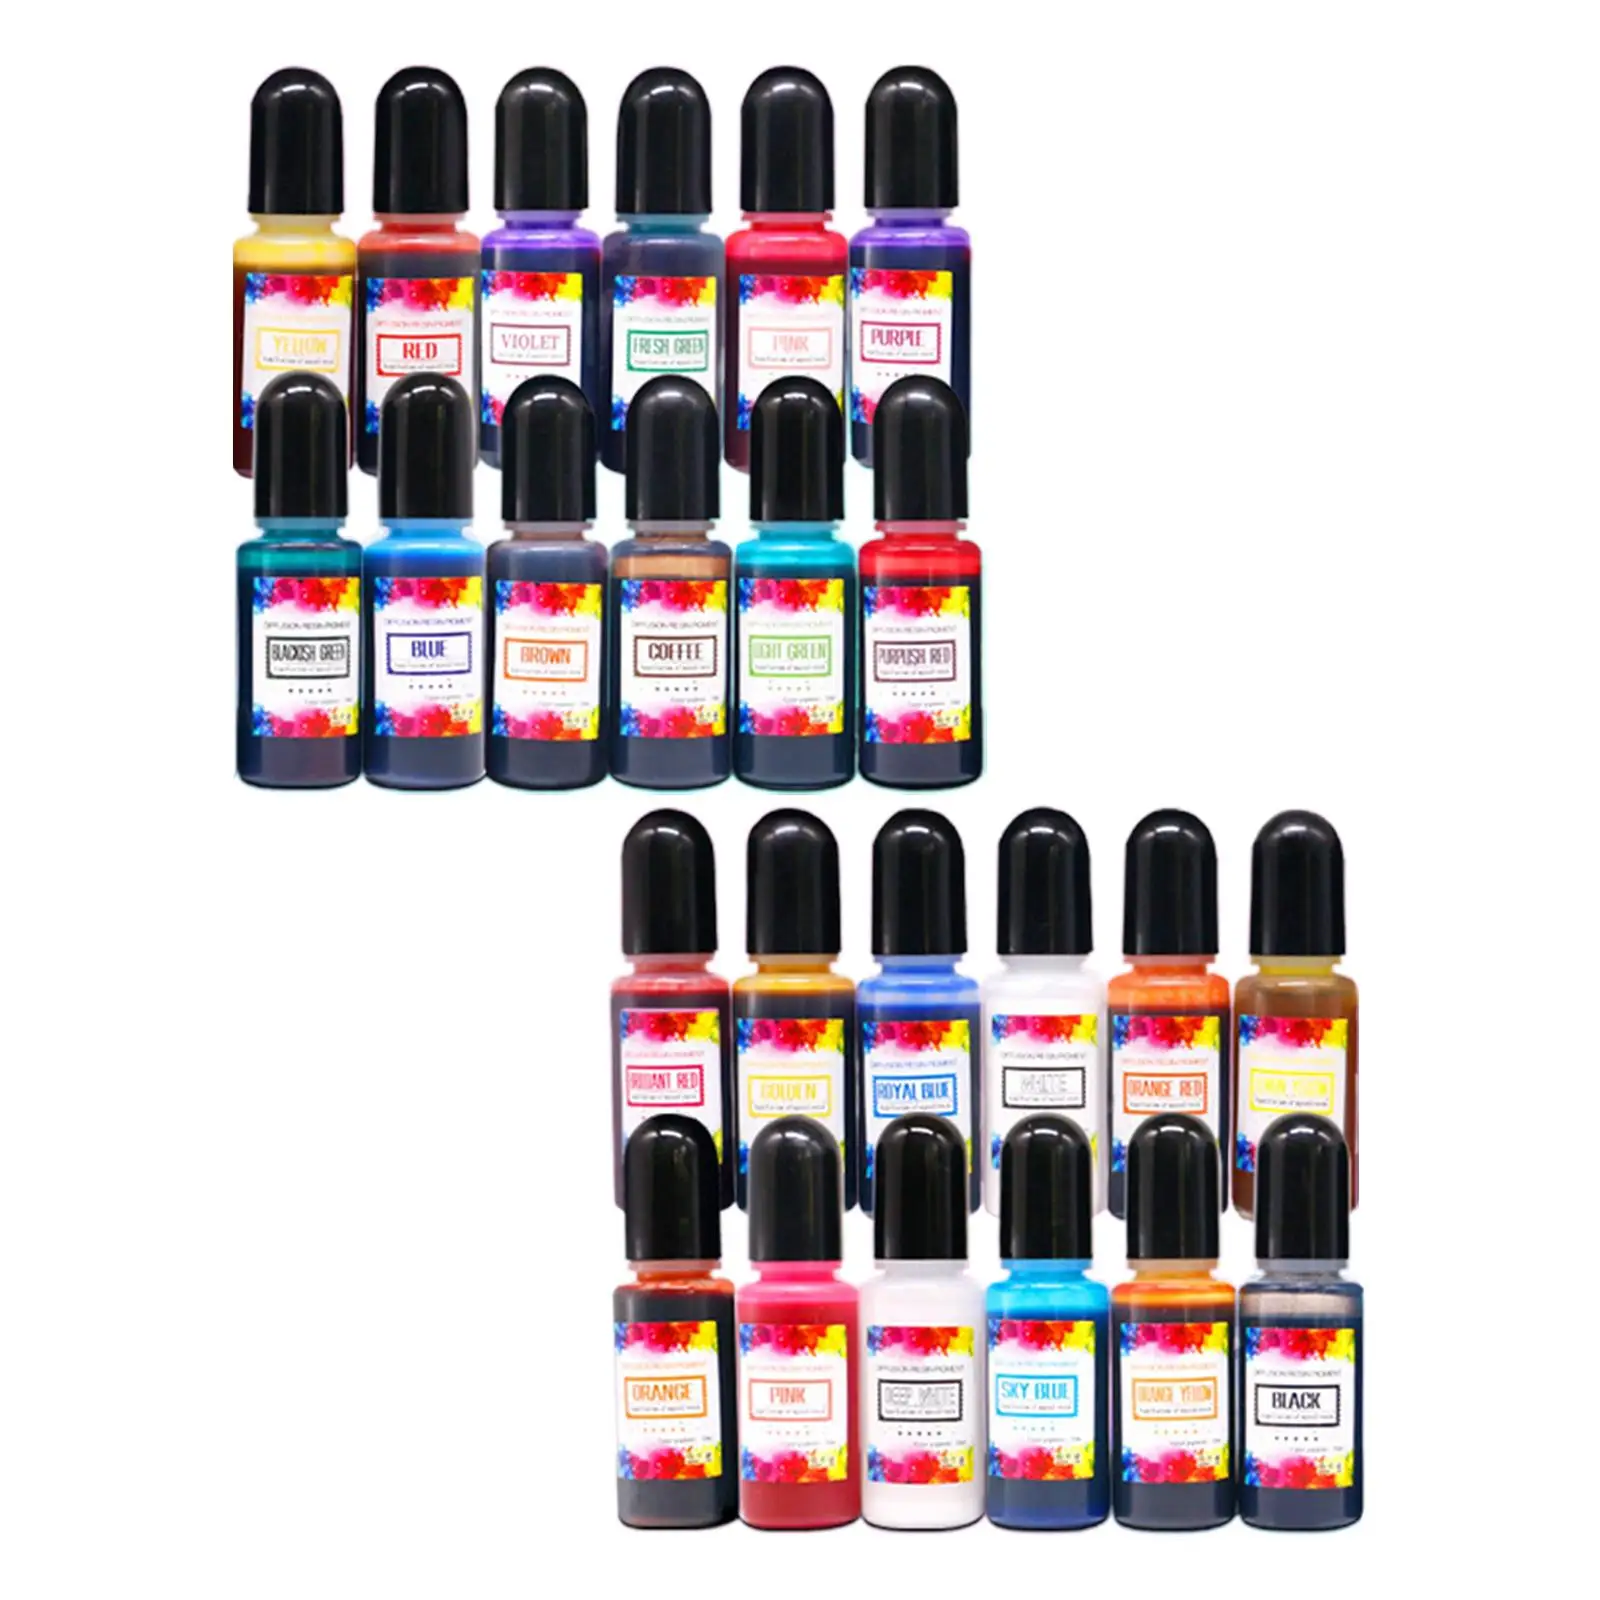 24x Alcohol Inks Epoxy Resin Pigment Colorant Liquid Dye Concentrate Color Dye 10ml for Acrylic Paint Scrapbook DIY Crafts Paint